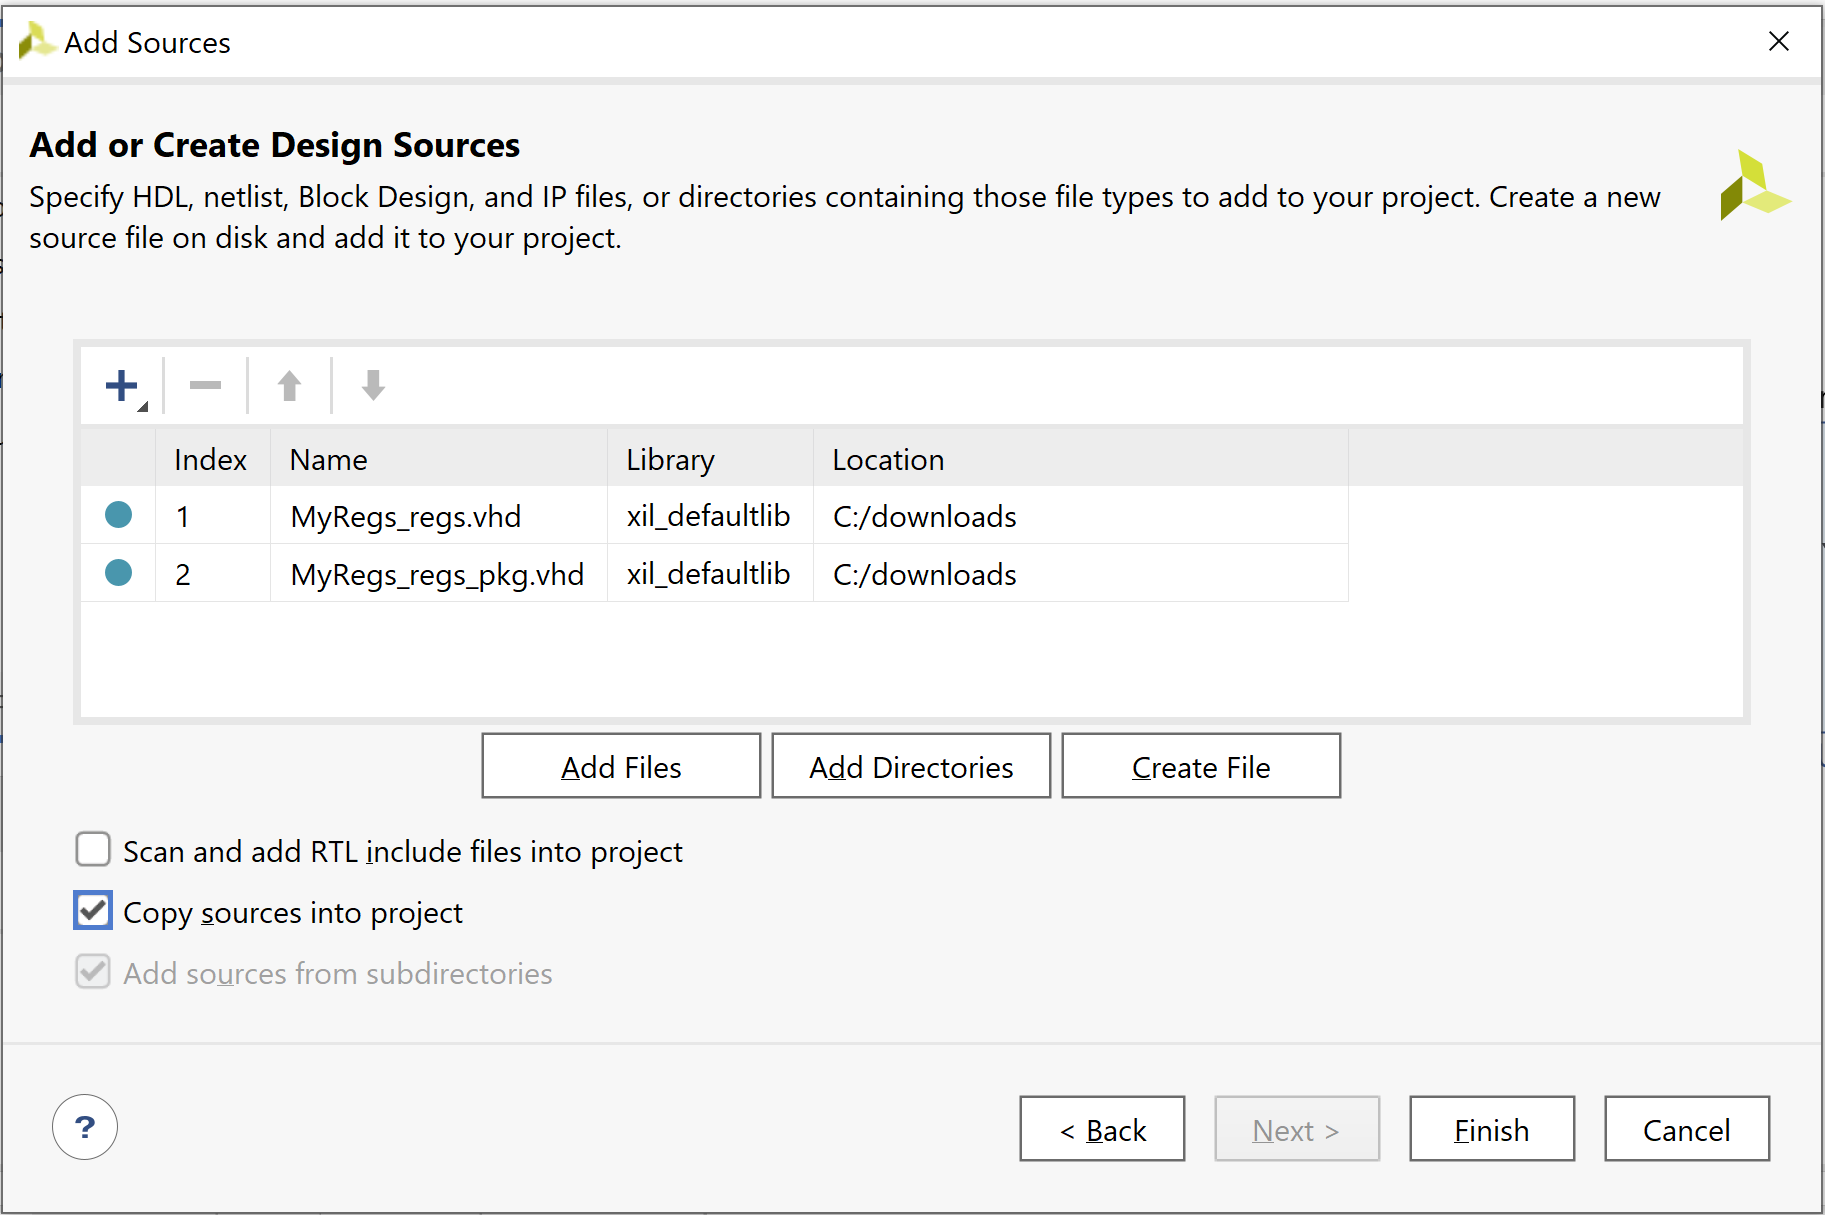 Add Sources dialog